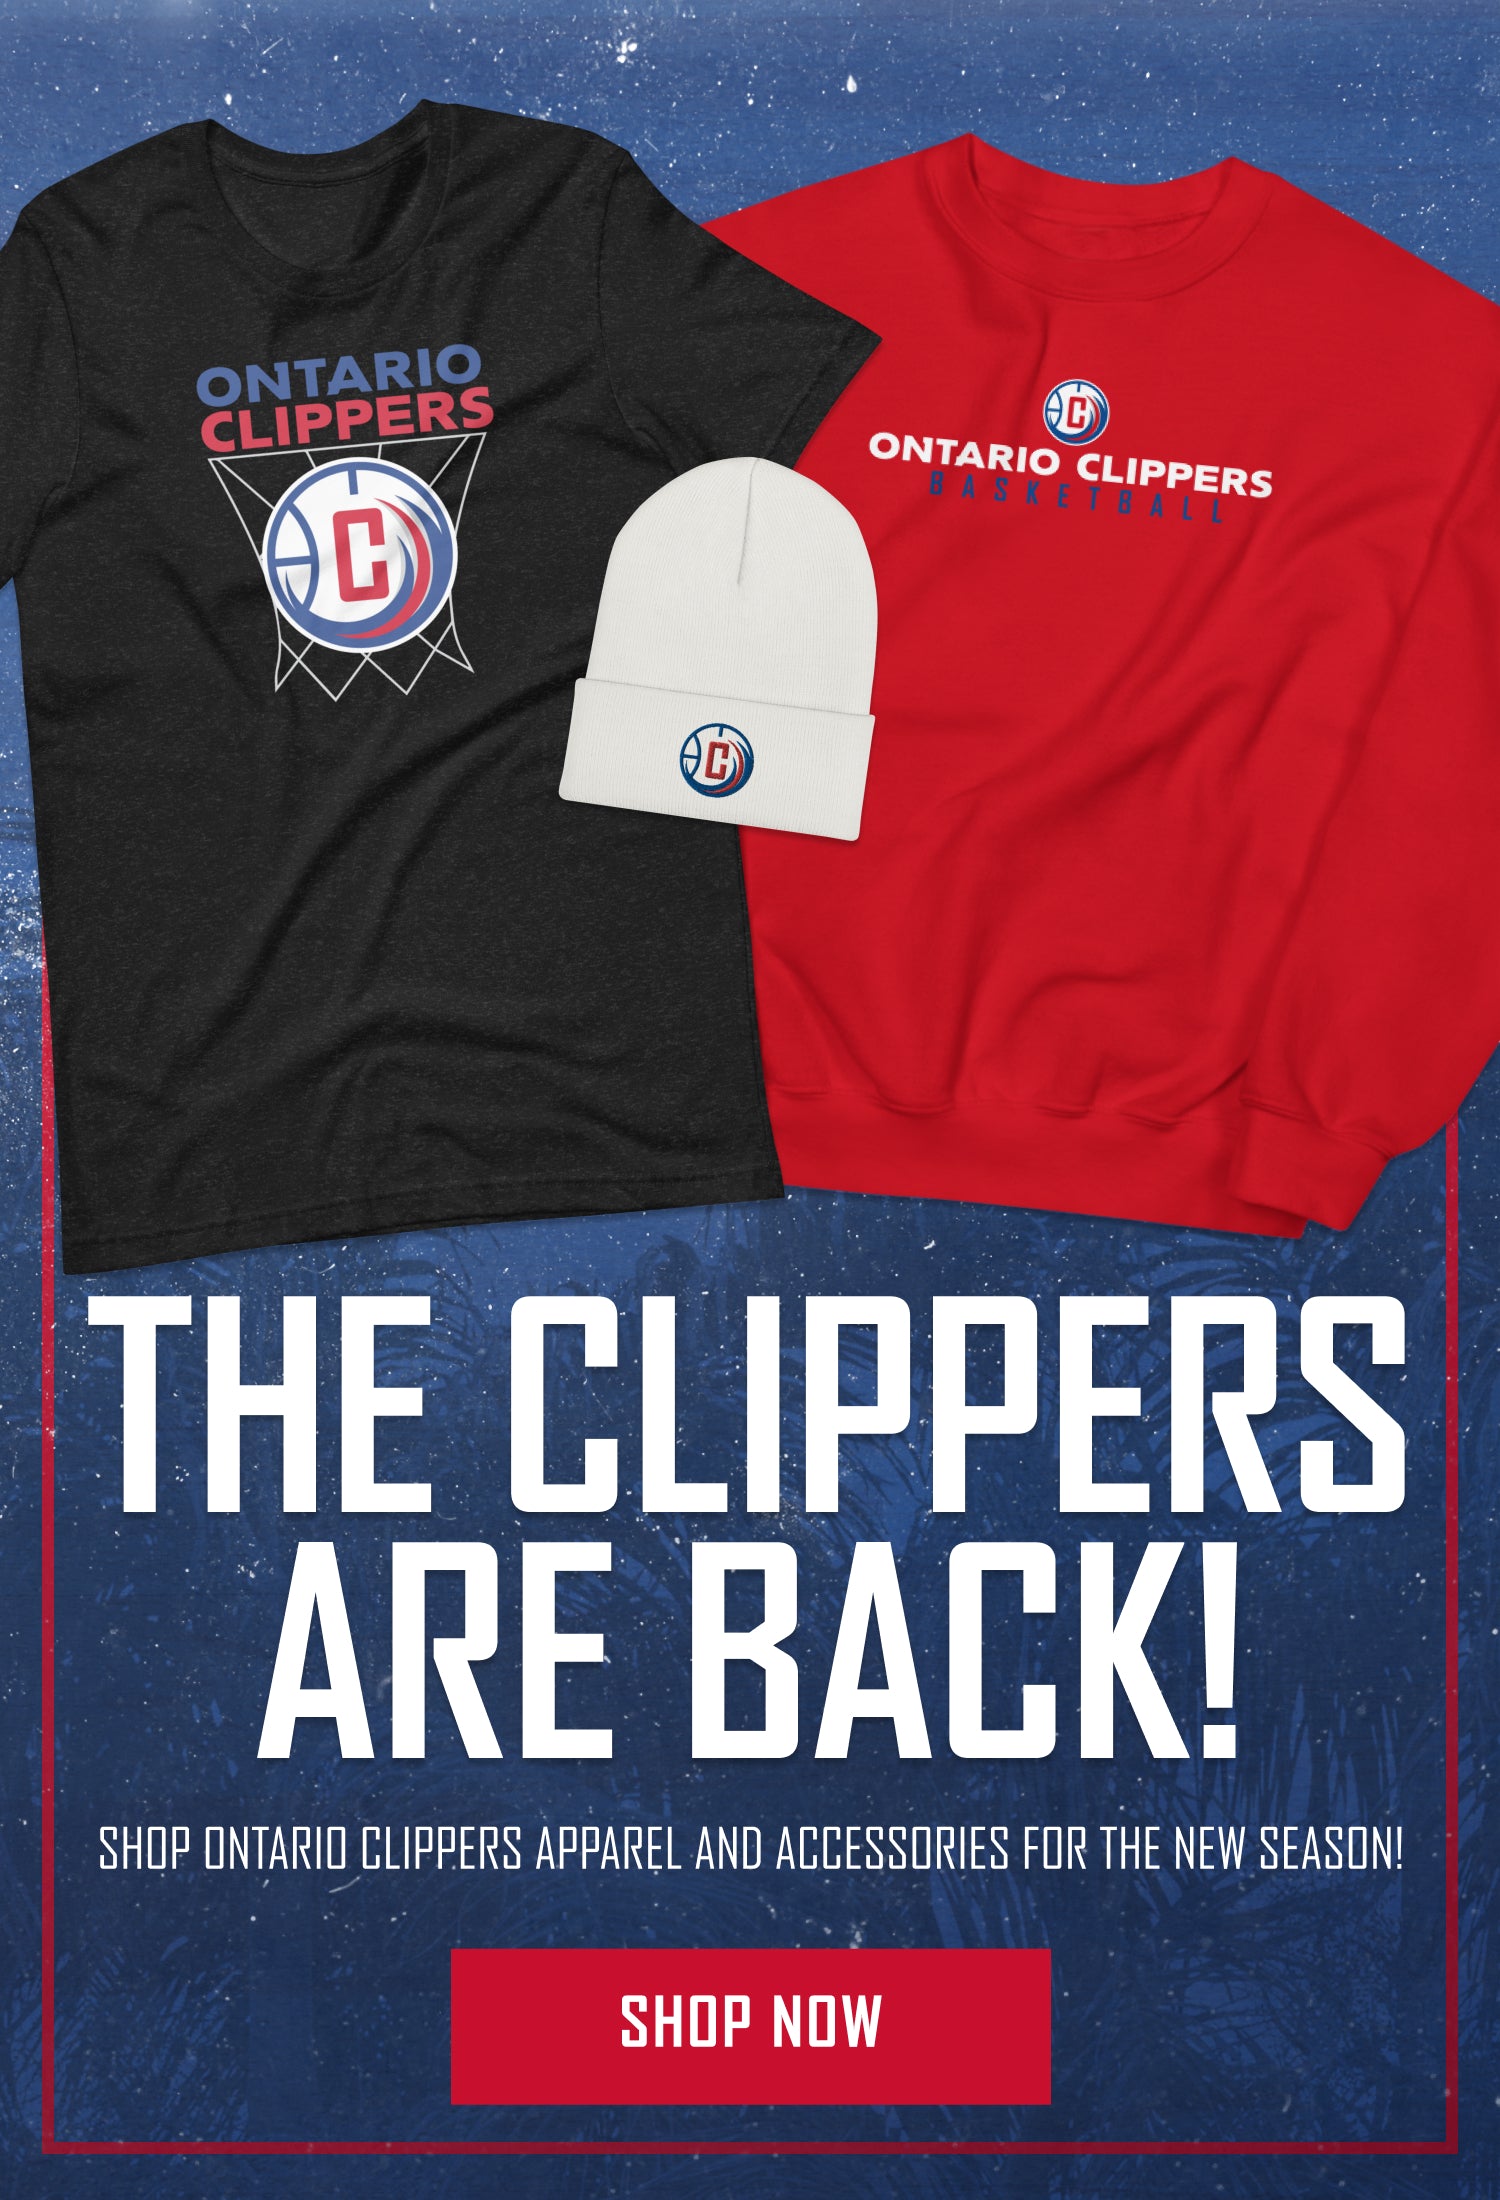 Link to https://ontarioclippersshop.com/collections/apparel